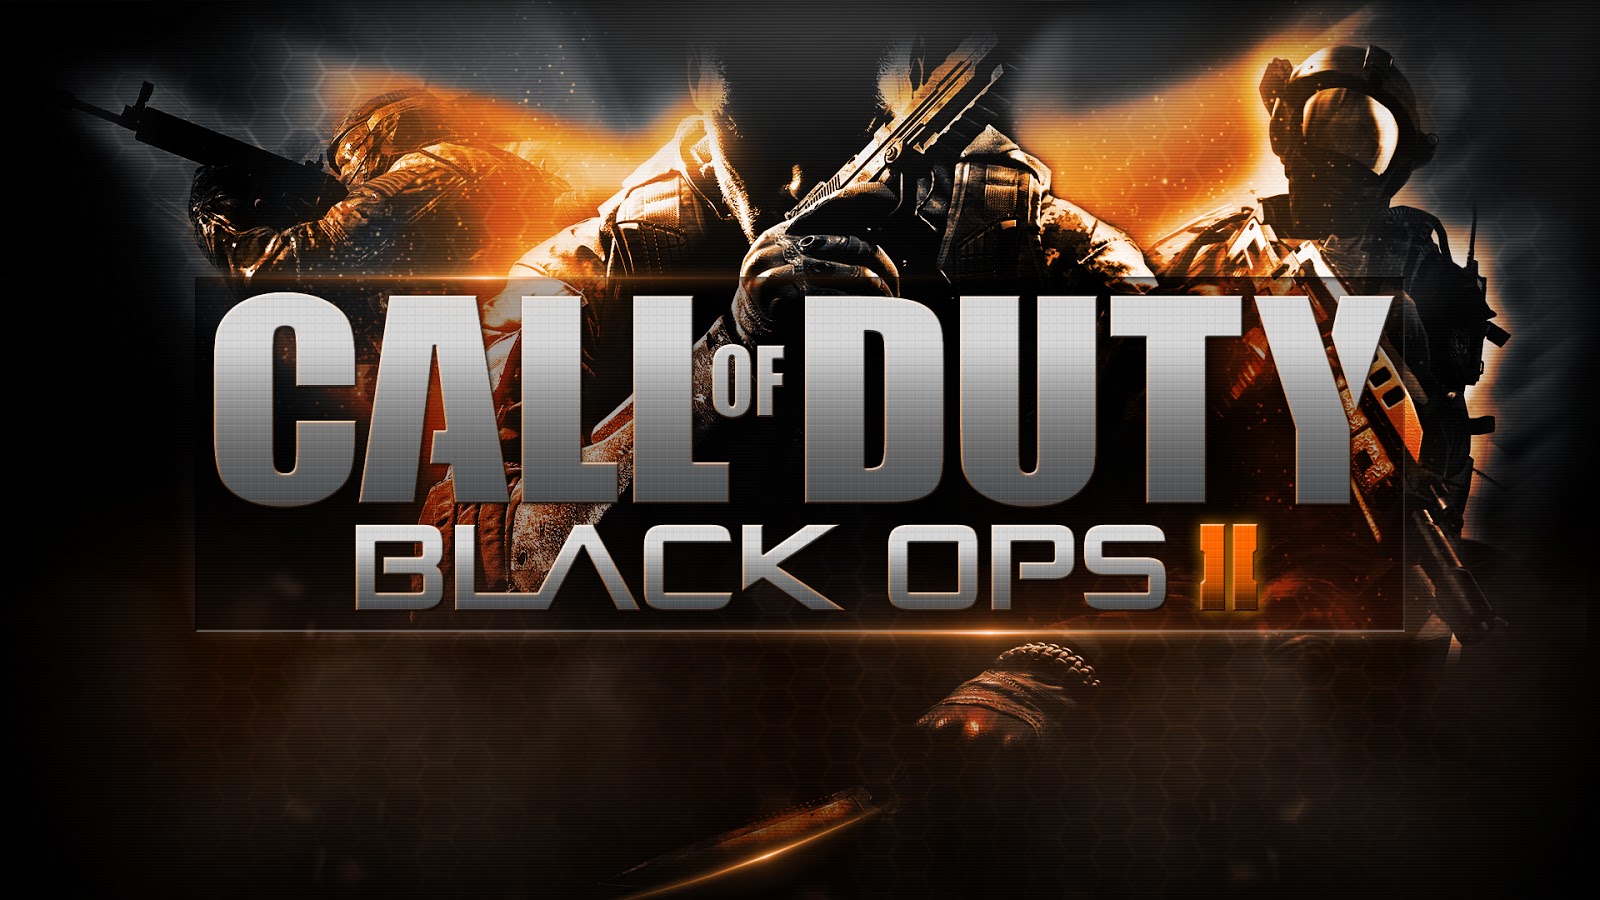 HD WALLPAPERS: Call of Duty Black ops 2 HD Wallpapers